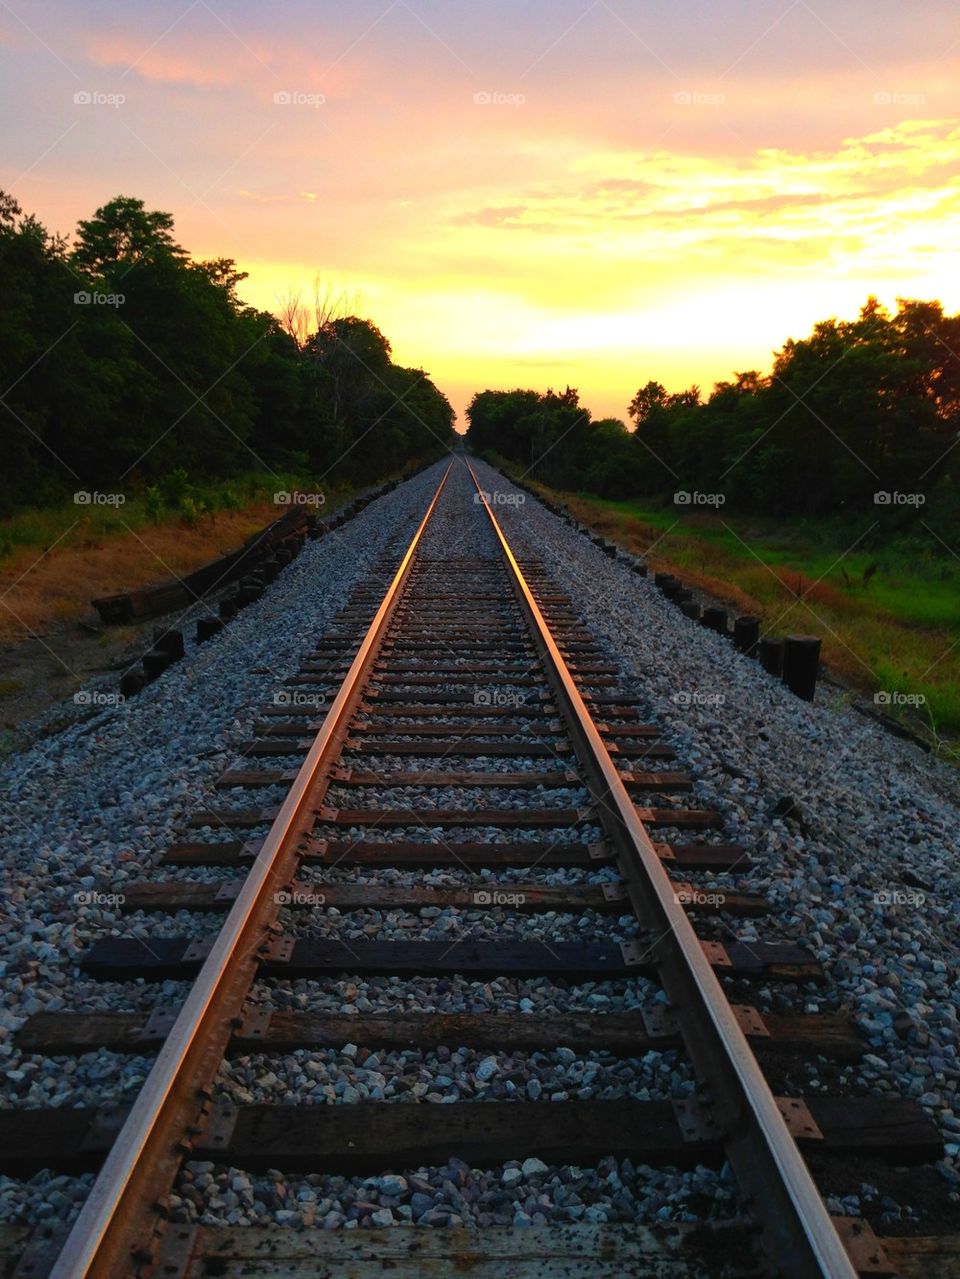 Railroading into the Sunset